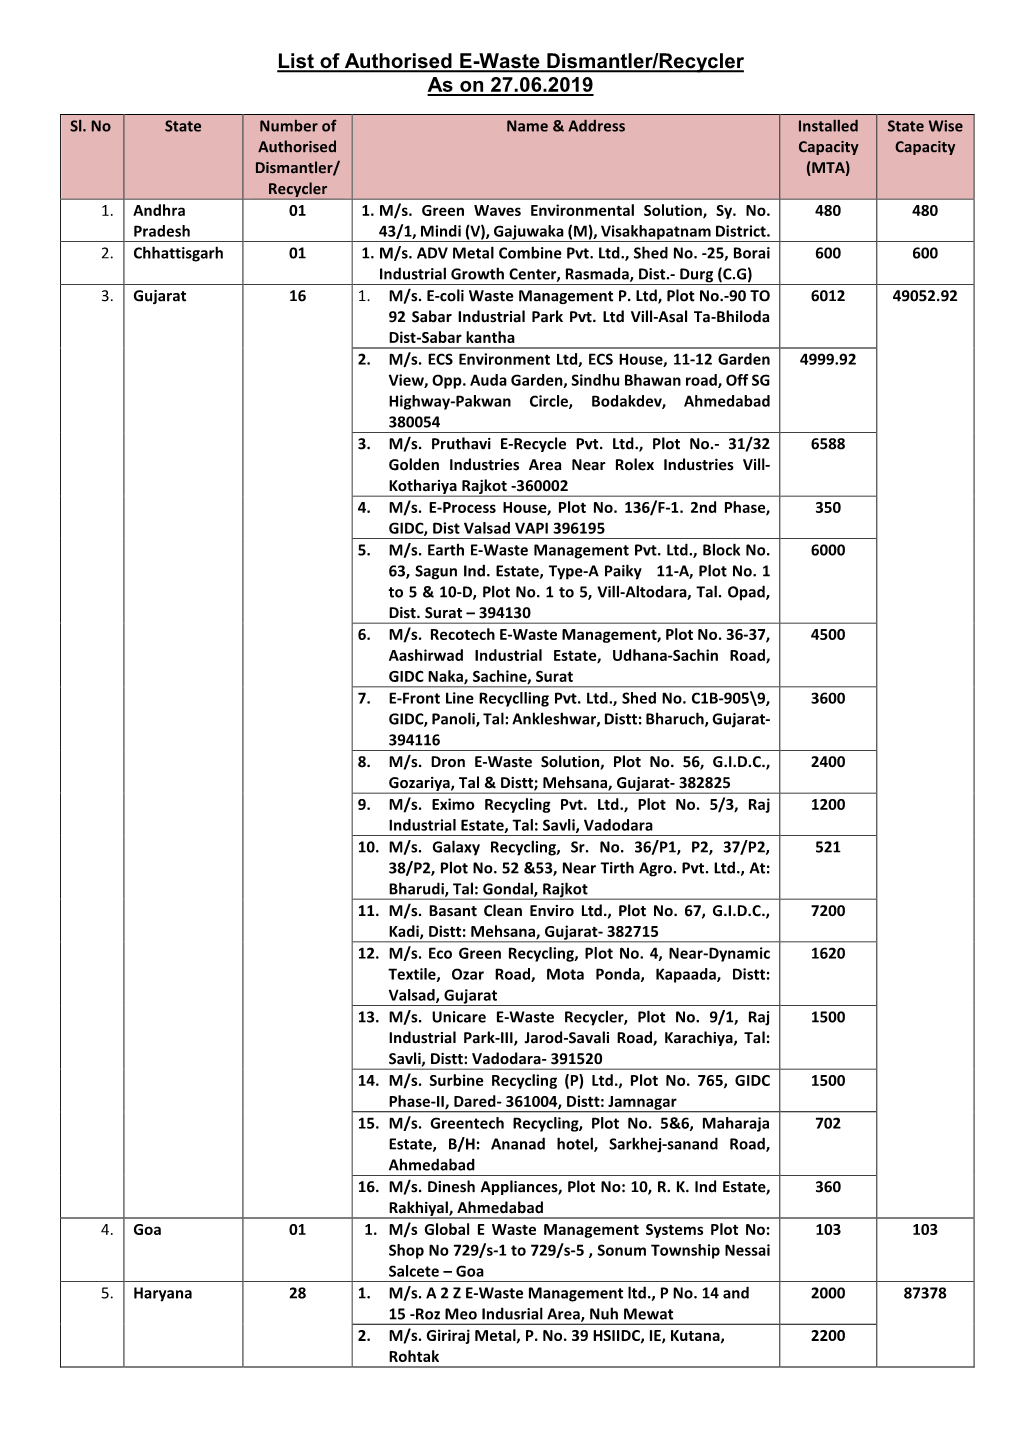 List of Authorised E-Waste Dismantler/Recycler As on 27.06.2019